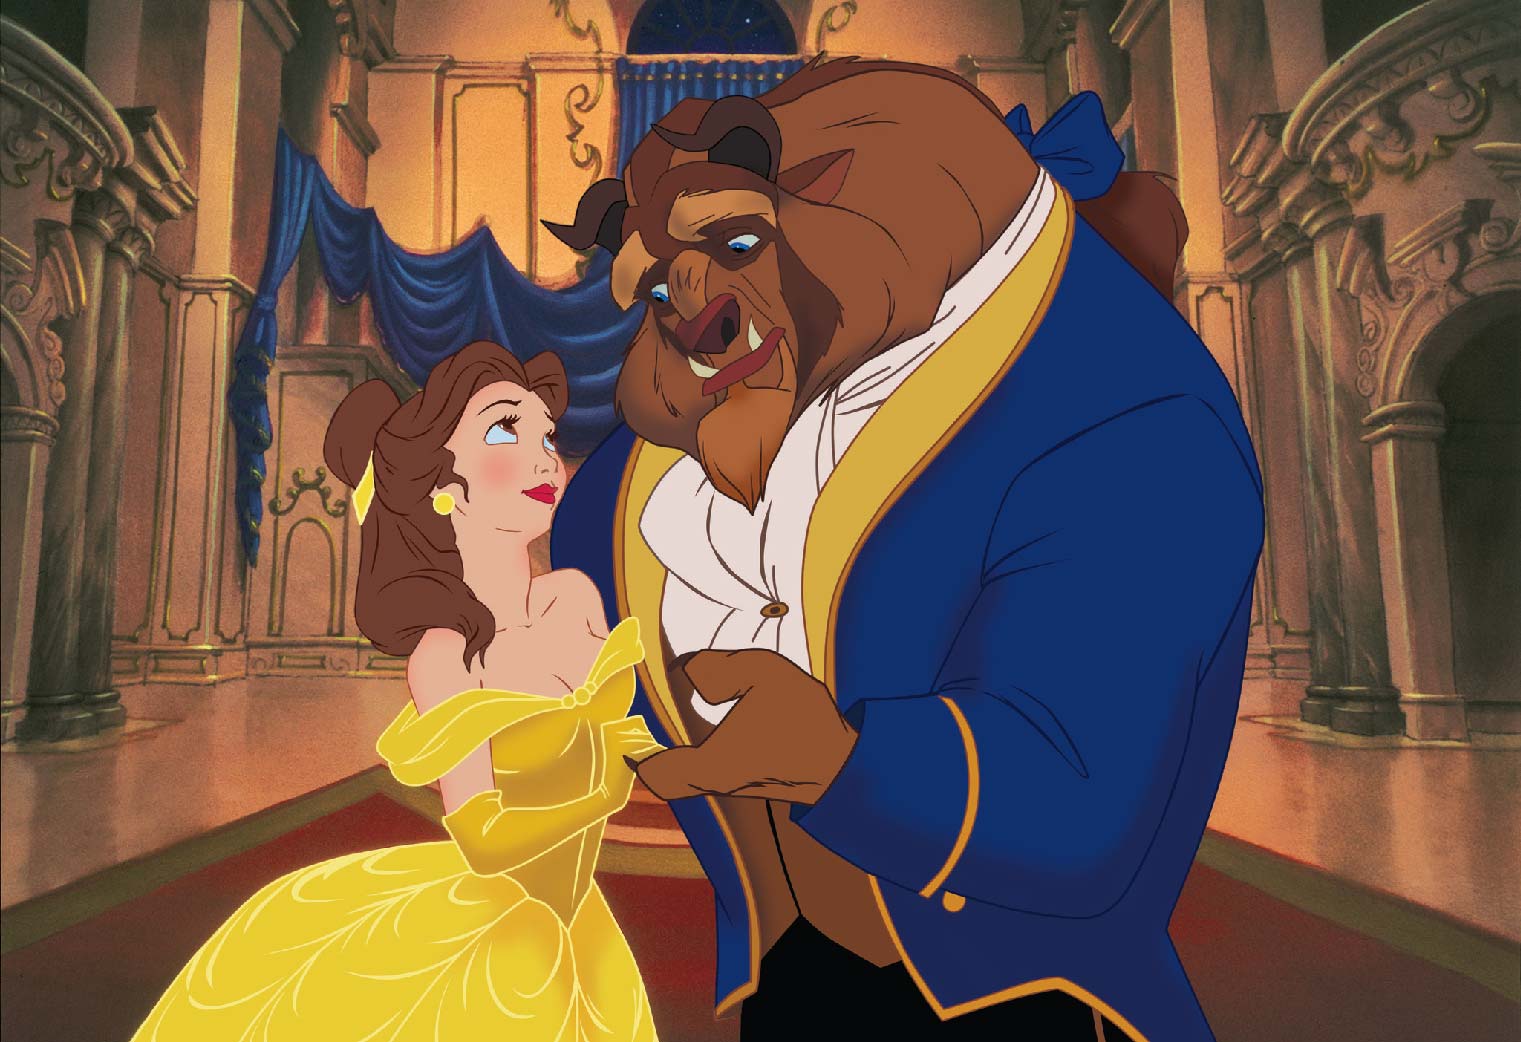 beauty and the beast 1991